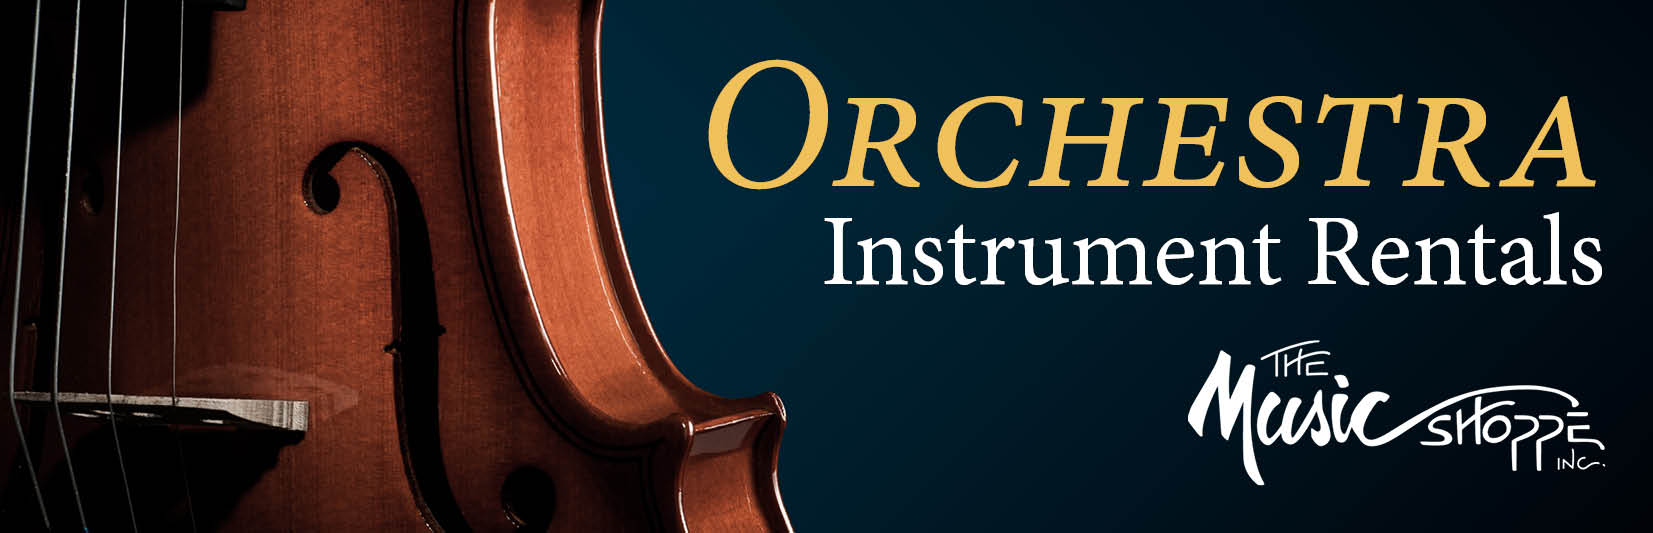 Orchestra Instrument Rentals from The Music Shoppe